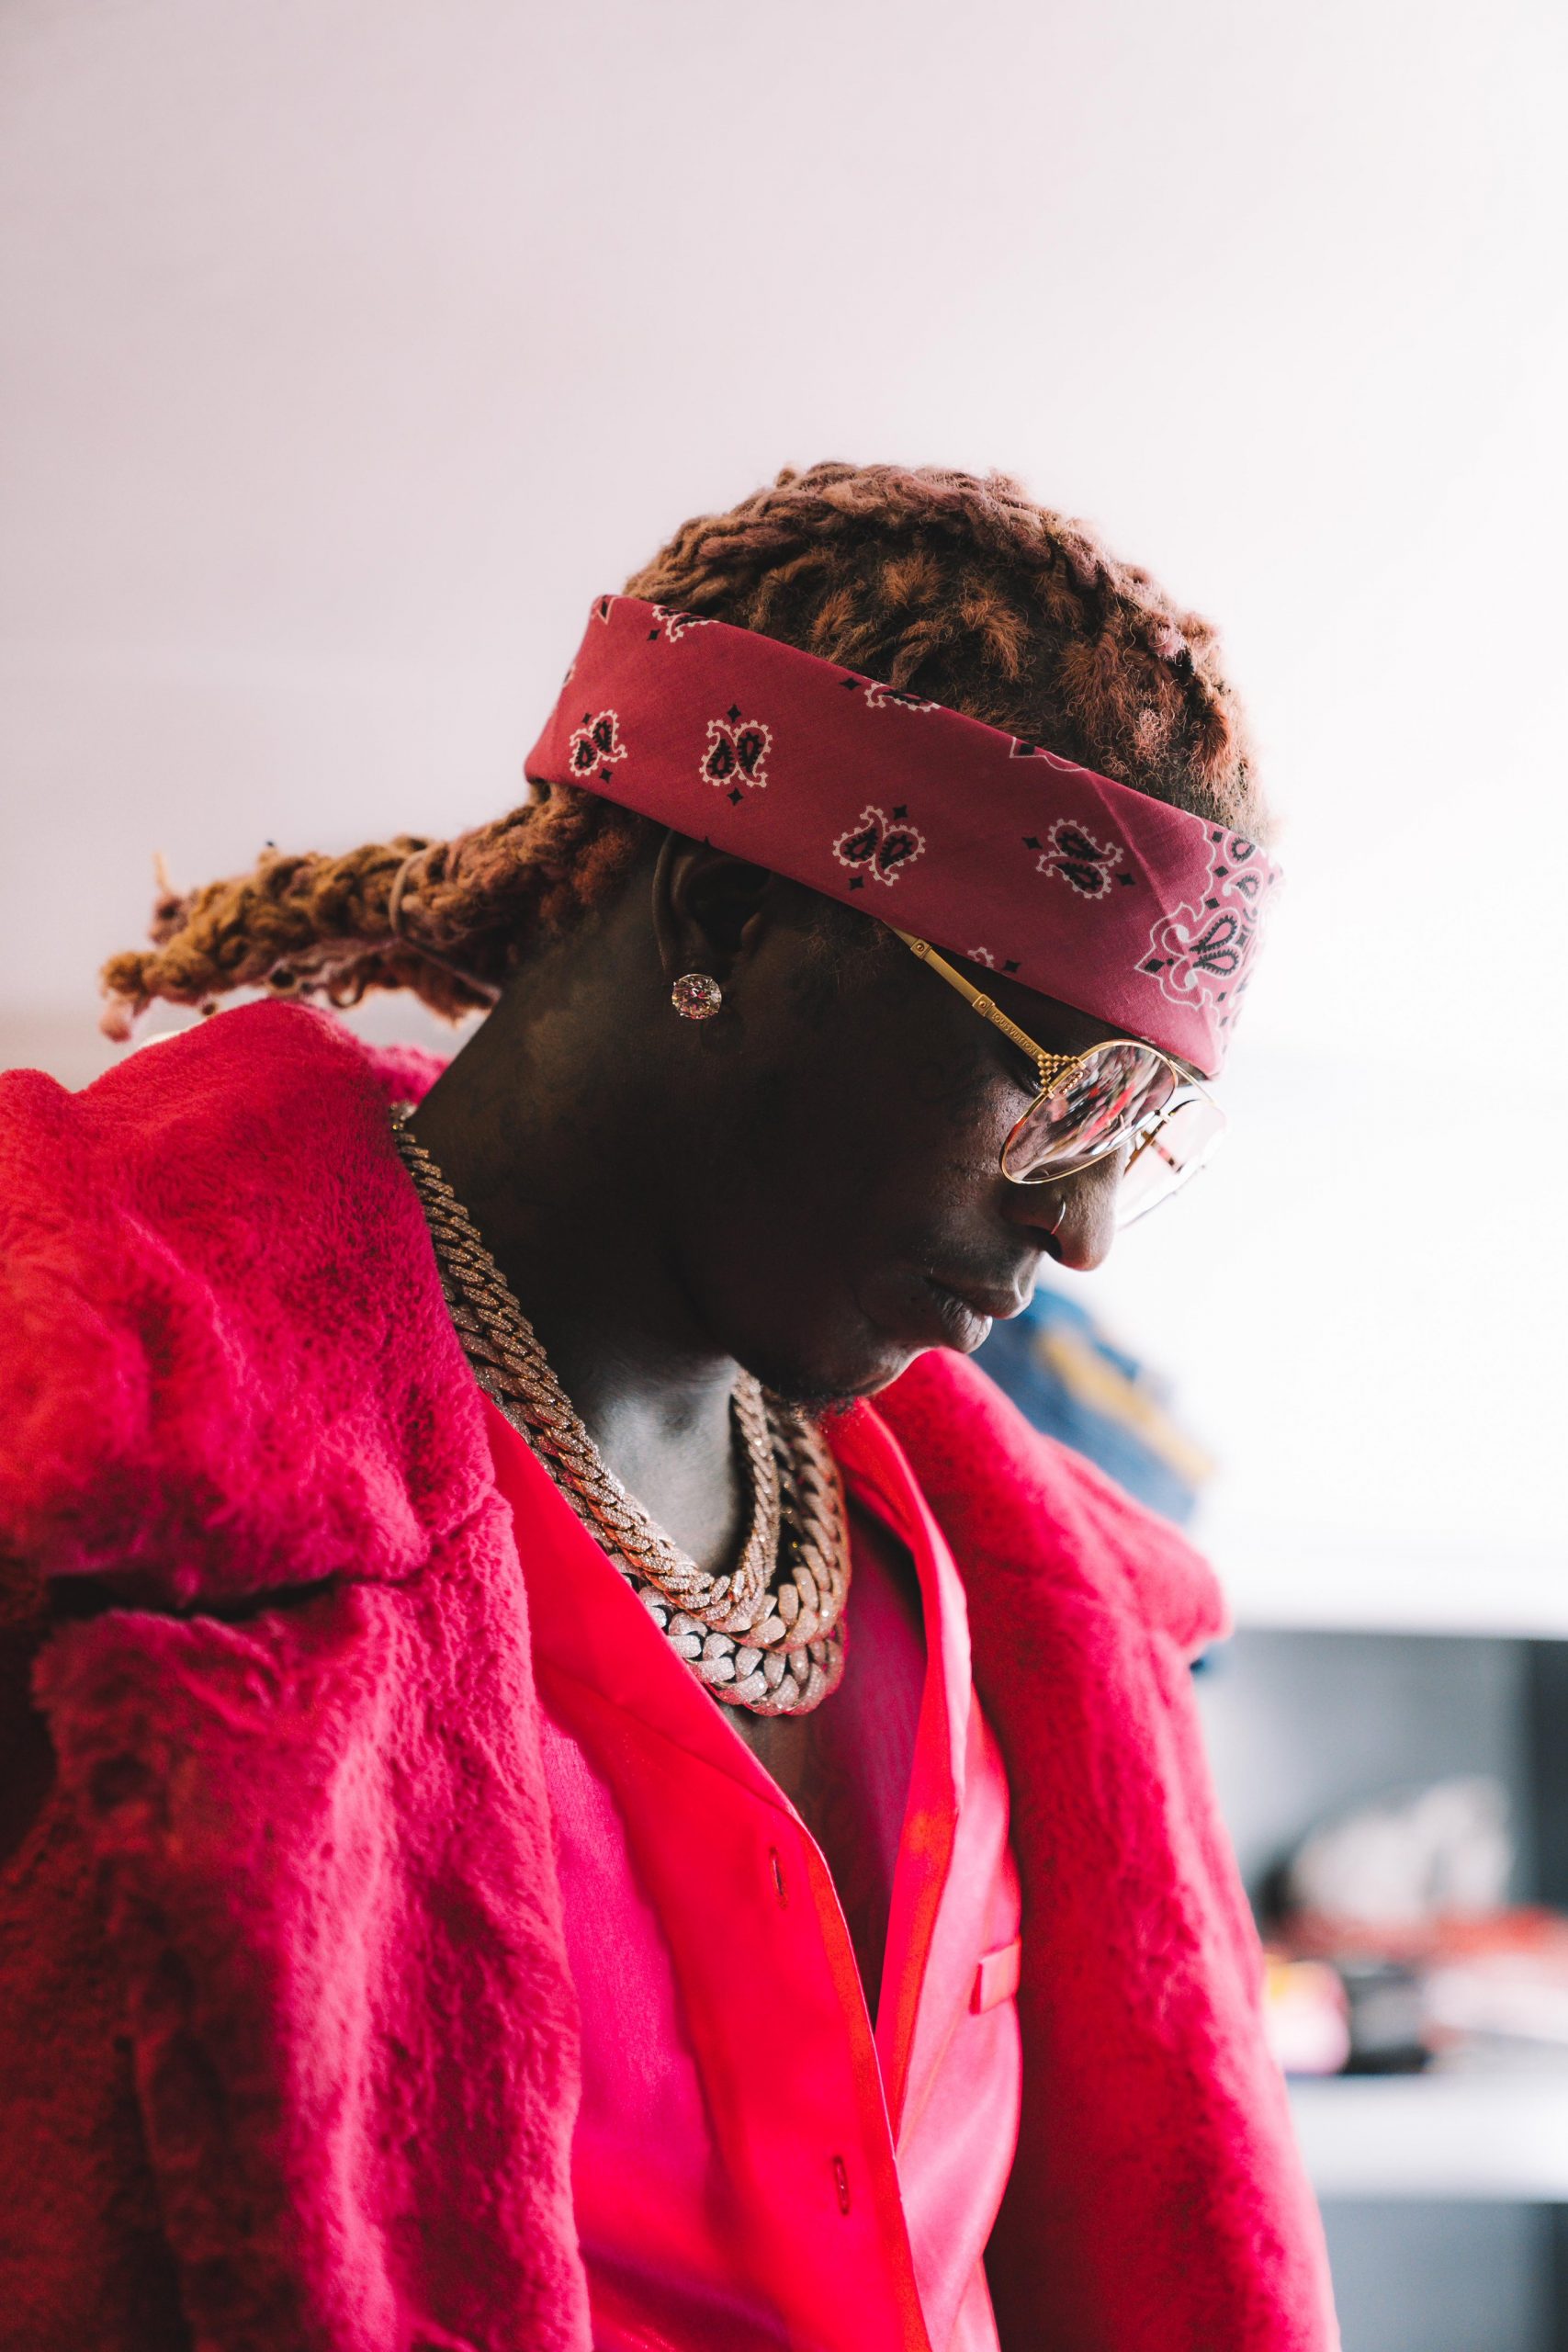 There might be a Young thug X lil Kim single coming